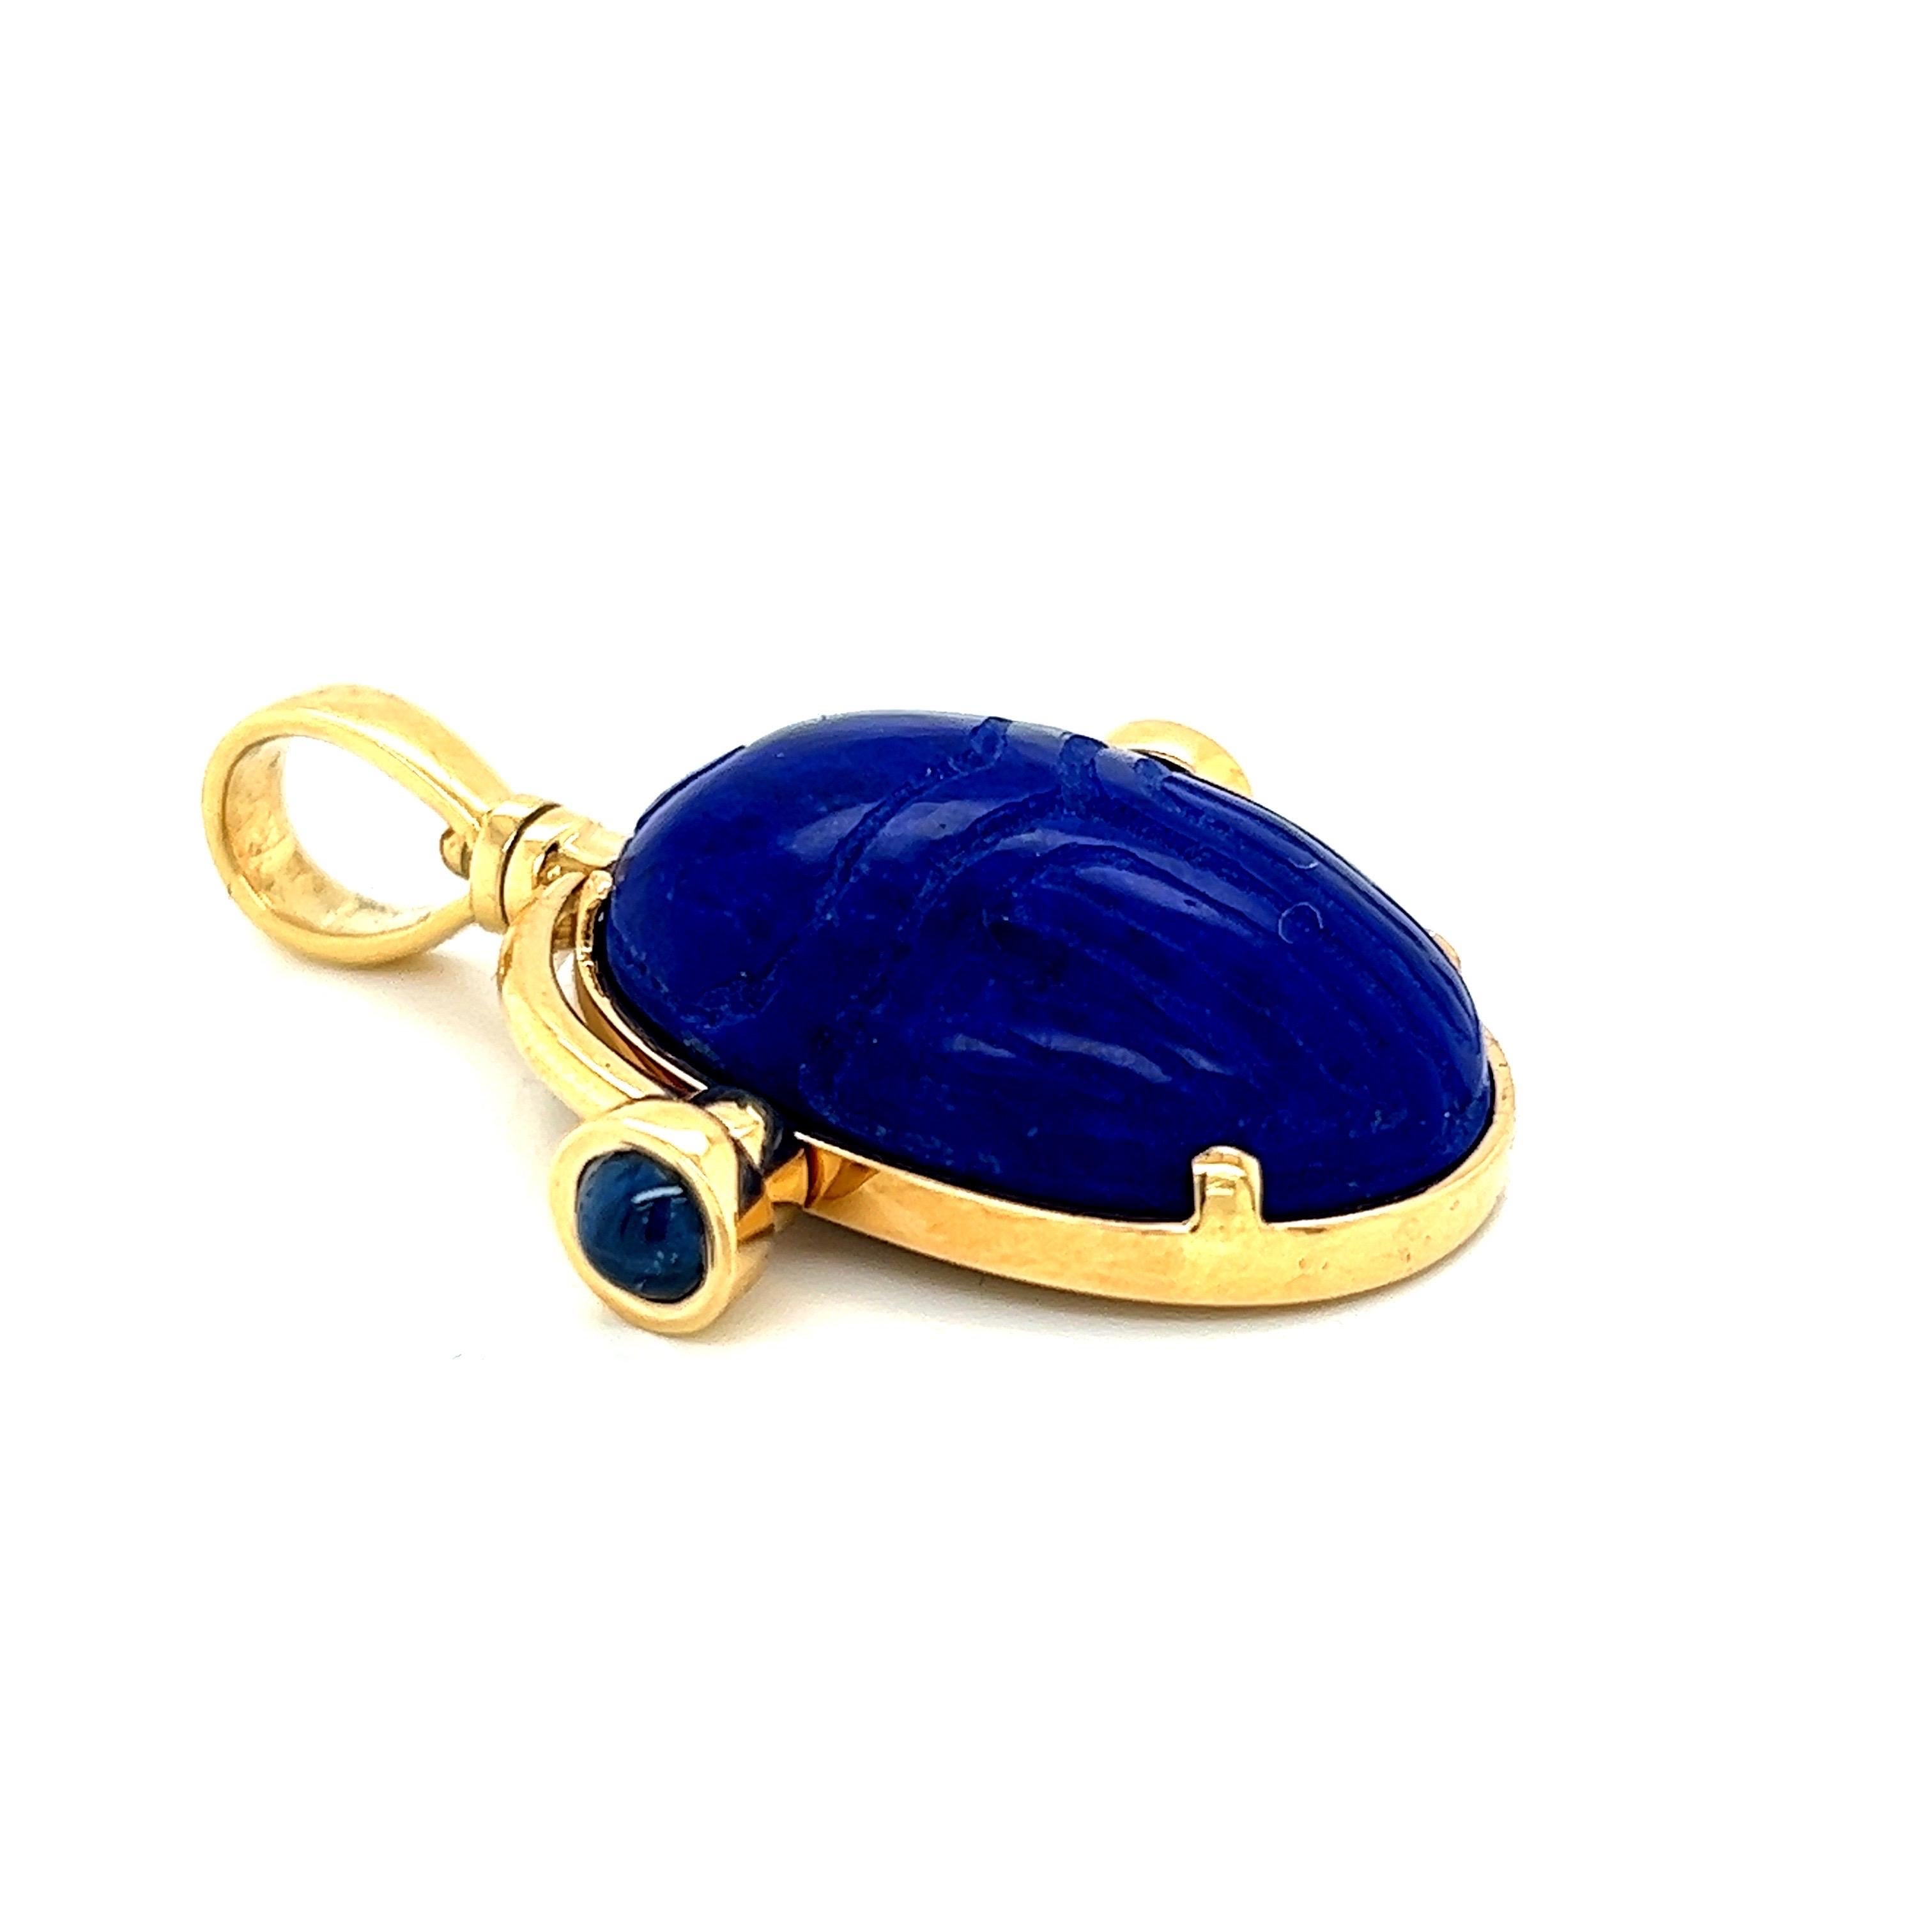 Hand carved scarab Lapis Lazuli pendant in 18k yellow gold with cabochon sapphires.
The scarab was carved by an artist in the United States and his signature is featured on the back of the scarab.

The pendant measurements are: H (including bail):